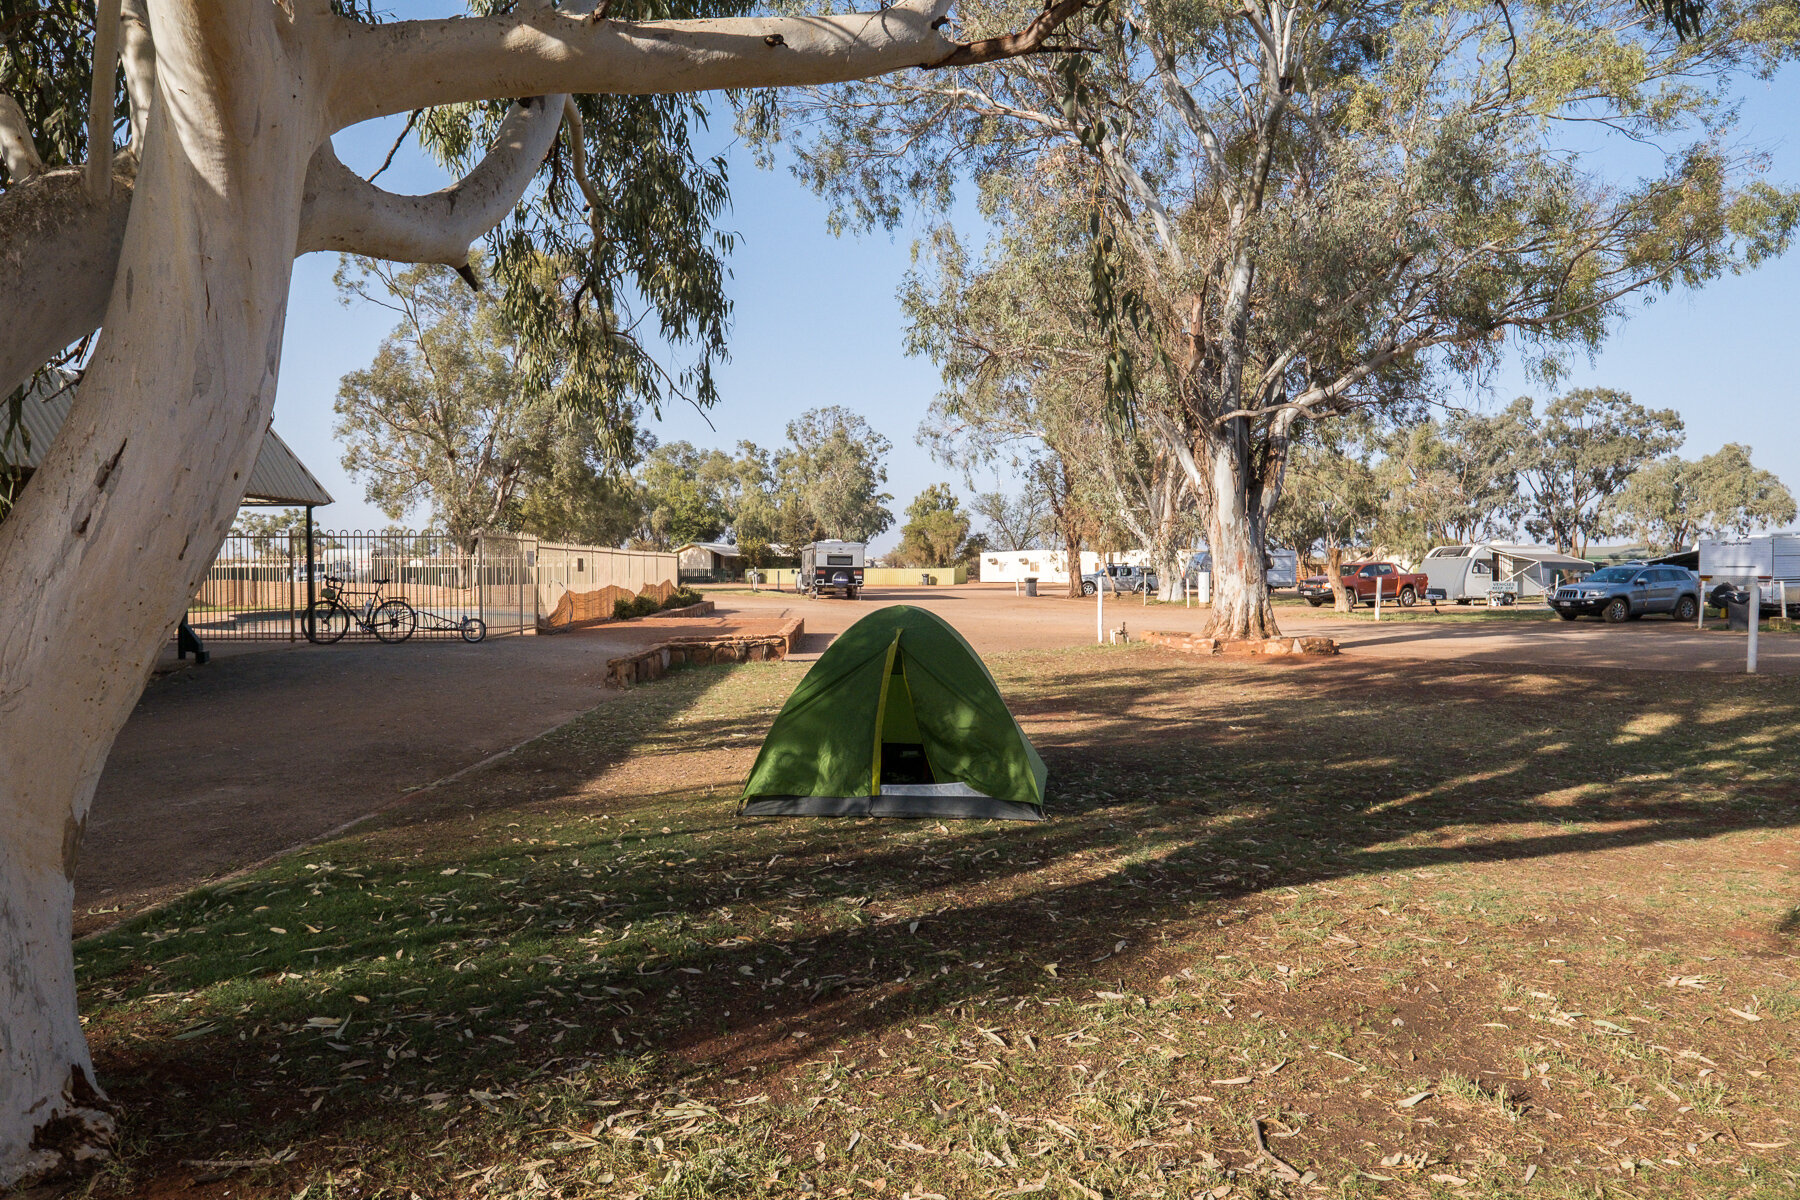  Camping in a road house is a great way to travel, as they provide access to a camp kitchen, warm shower, and washing machine. You also have the opportunity to chat with other travelers, which can make for a fun and enriching experience. 